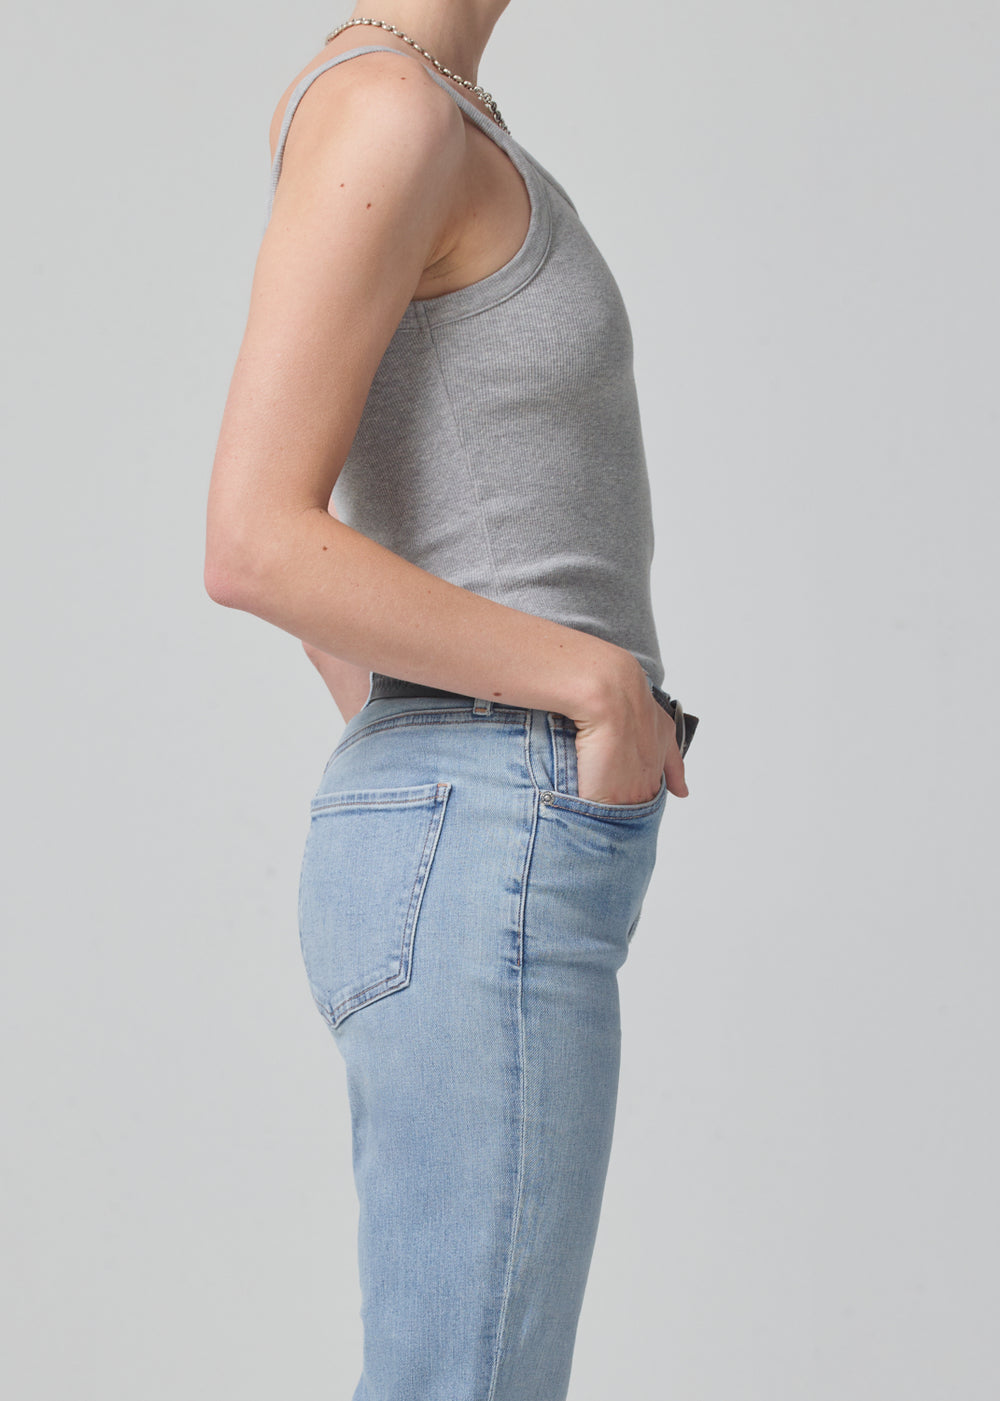 Citizens Of Humanity Katia Tank in Heather Grey available at TNT The New Trend Australia